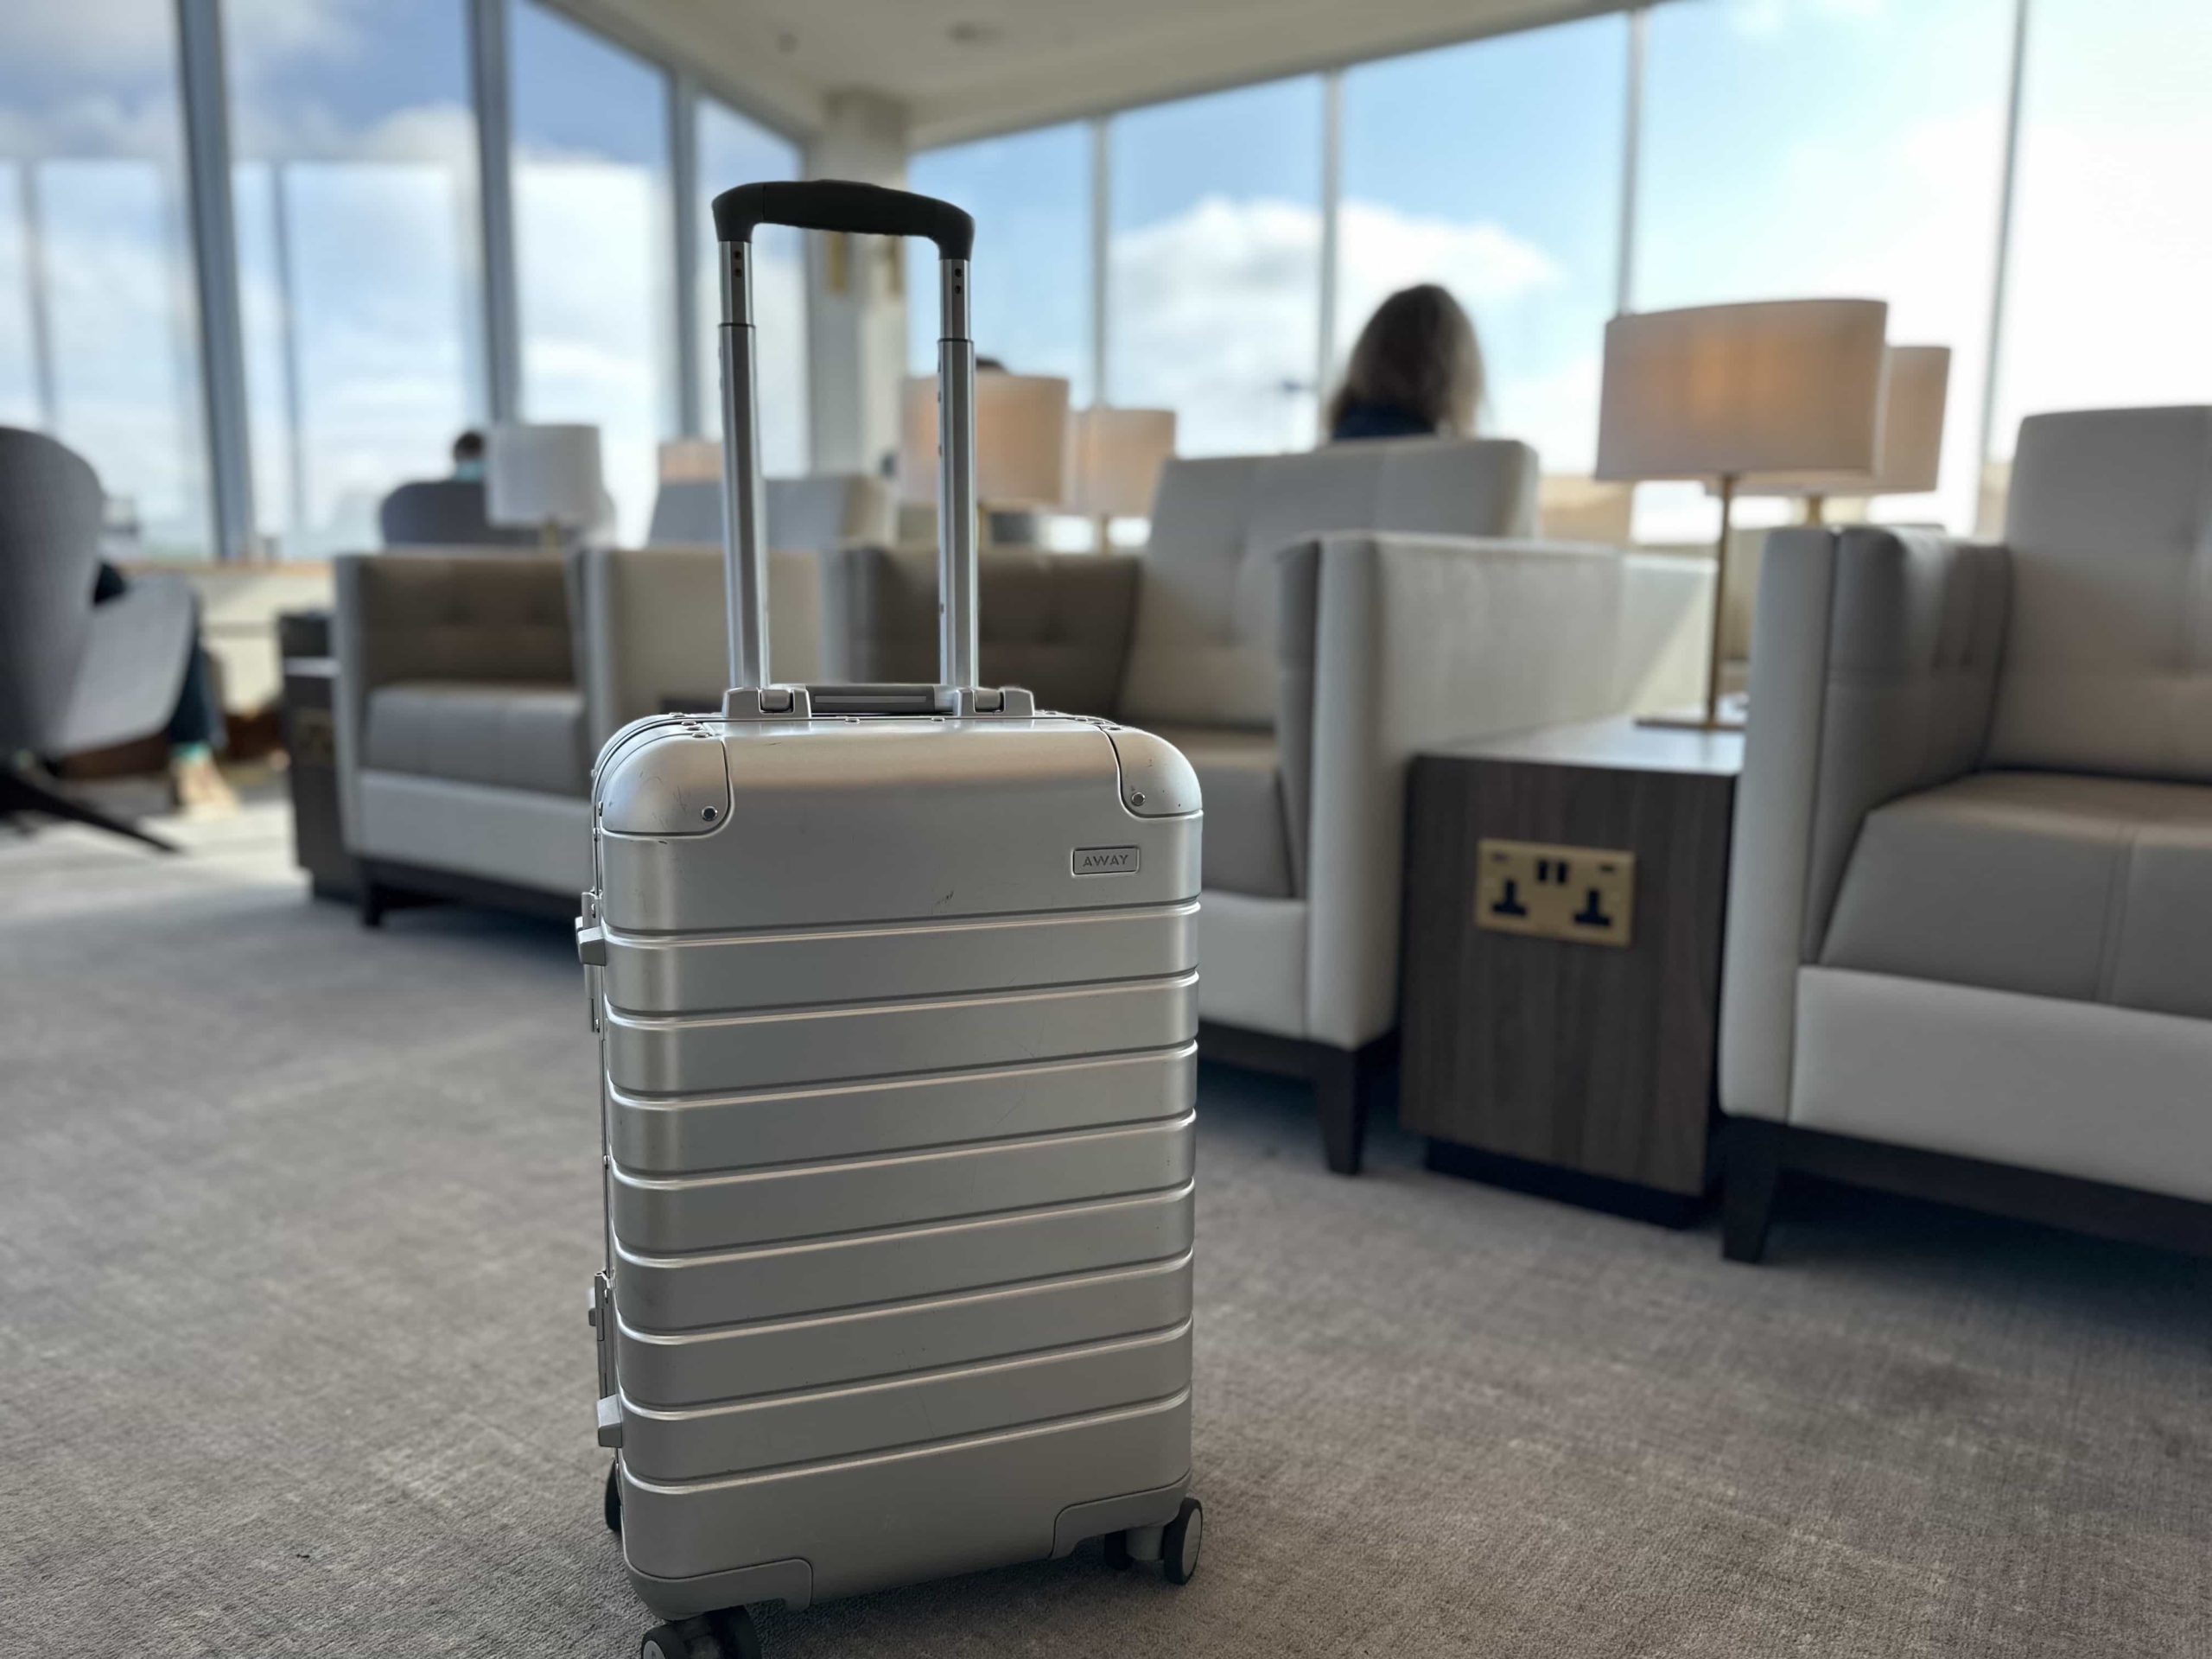 A suitcase situated in the middle of an aisle of armchairs in an airport lounge